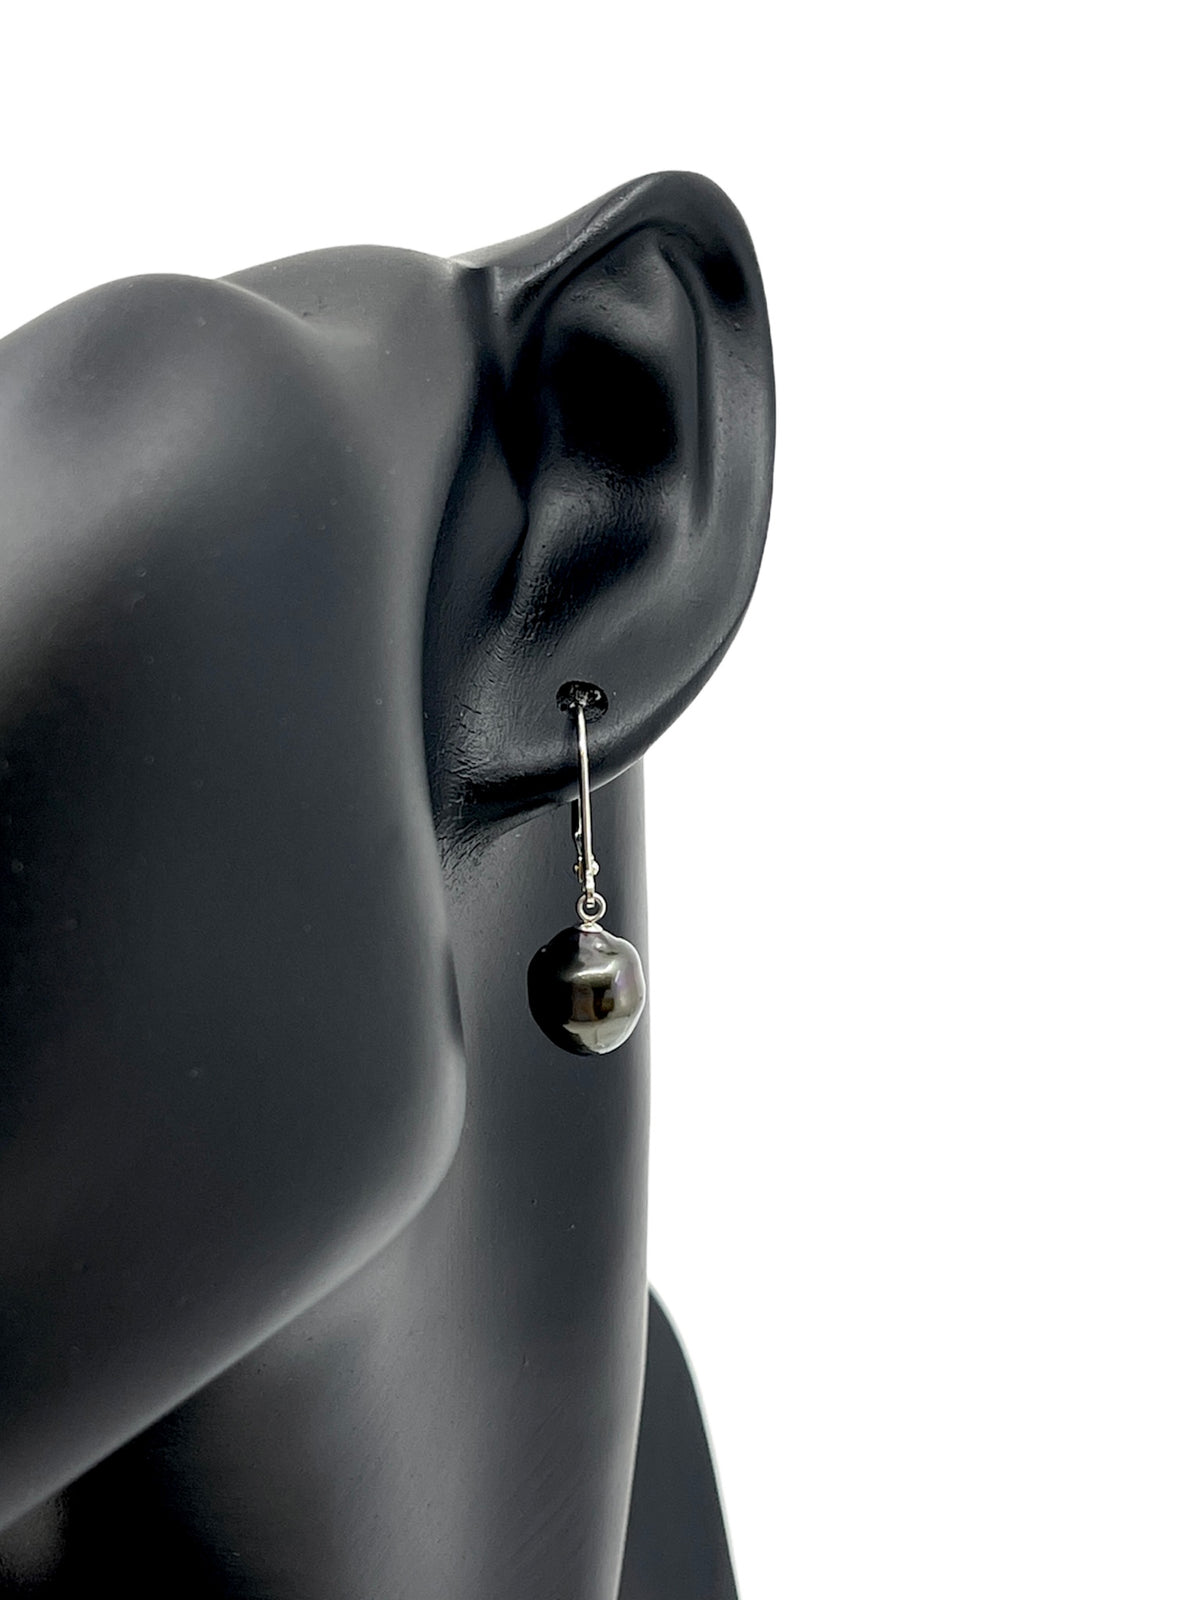 14K White Gold Tahitian Pearl Earrings with Lever Backs